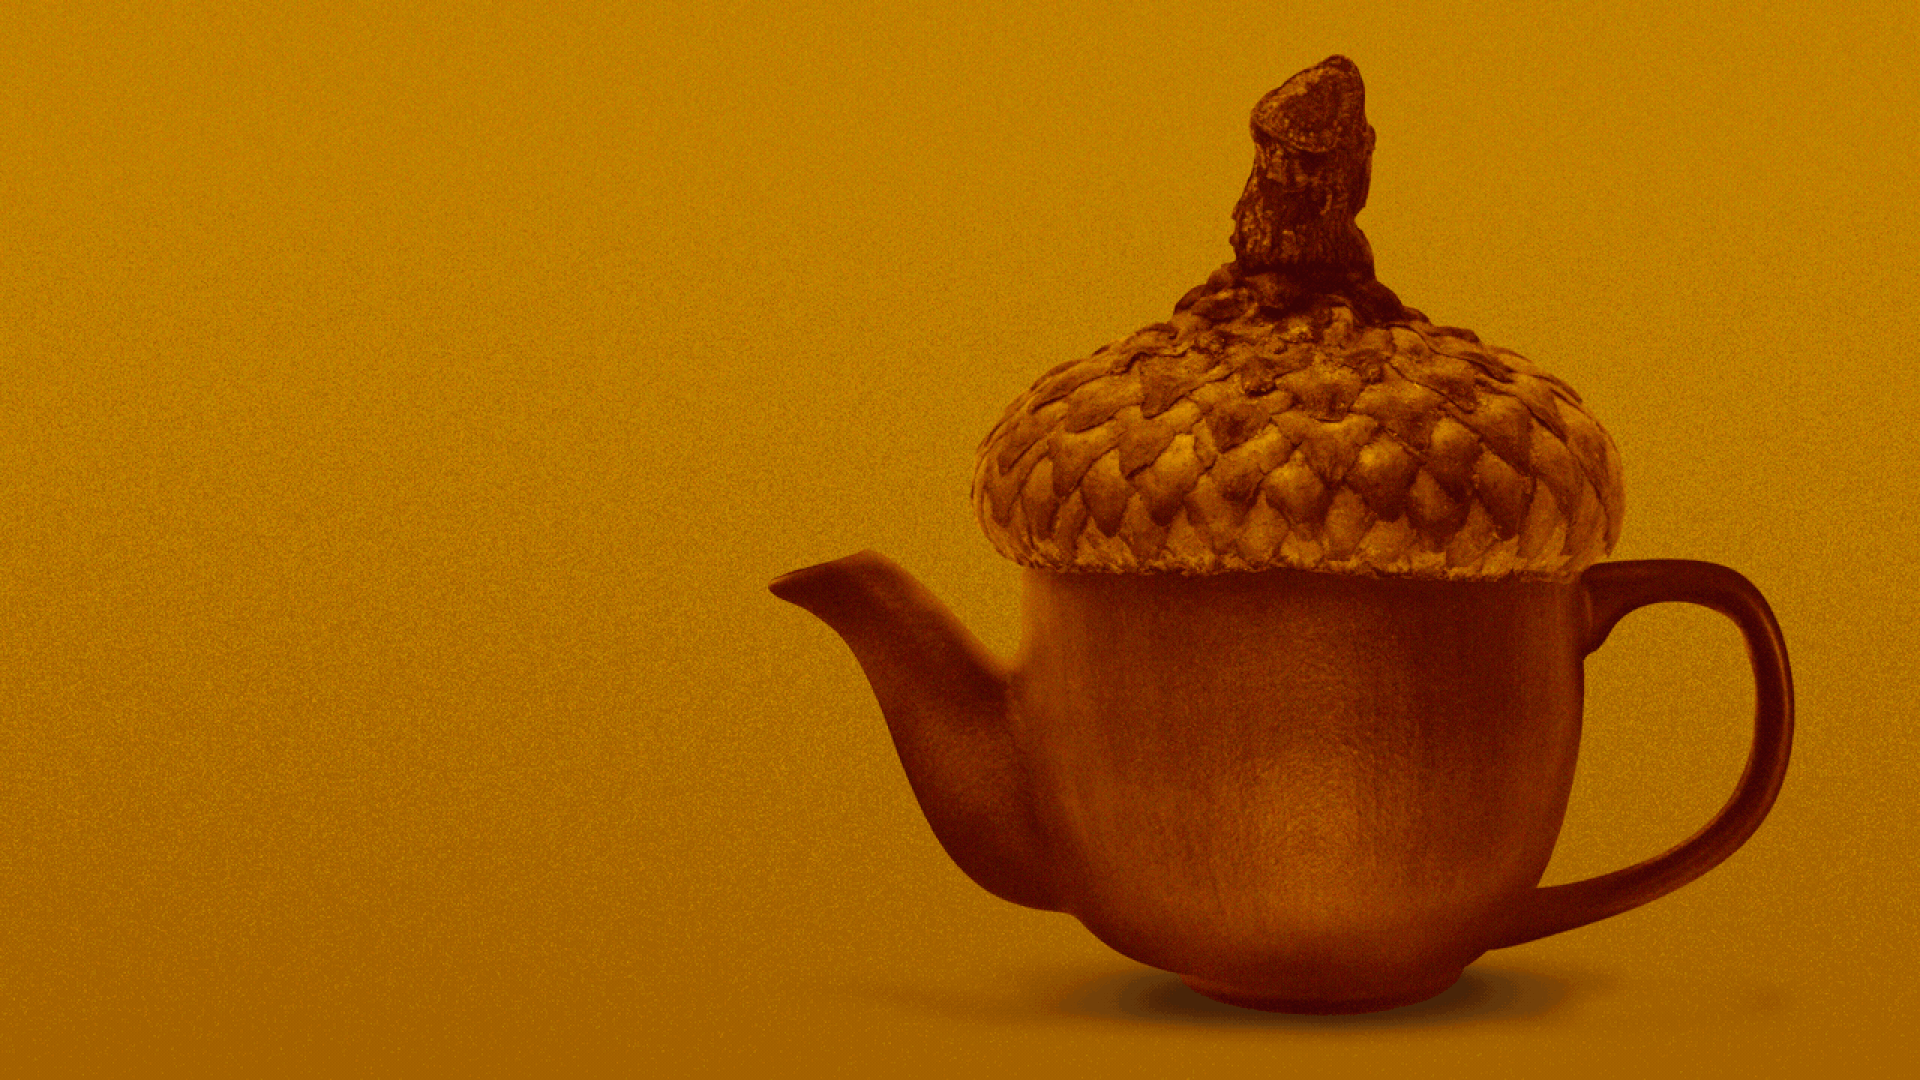 Illustration of a teapot made out of an acorn with steam coming from the spout.